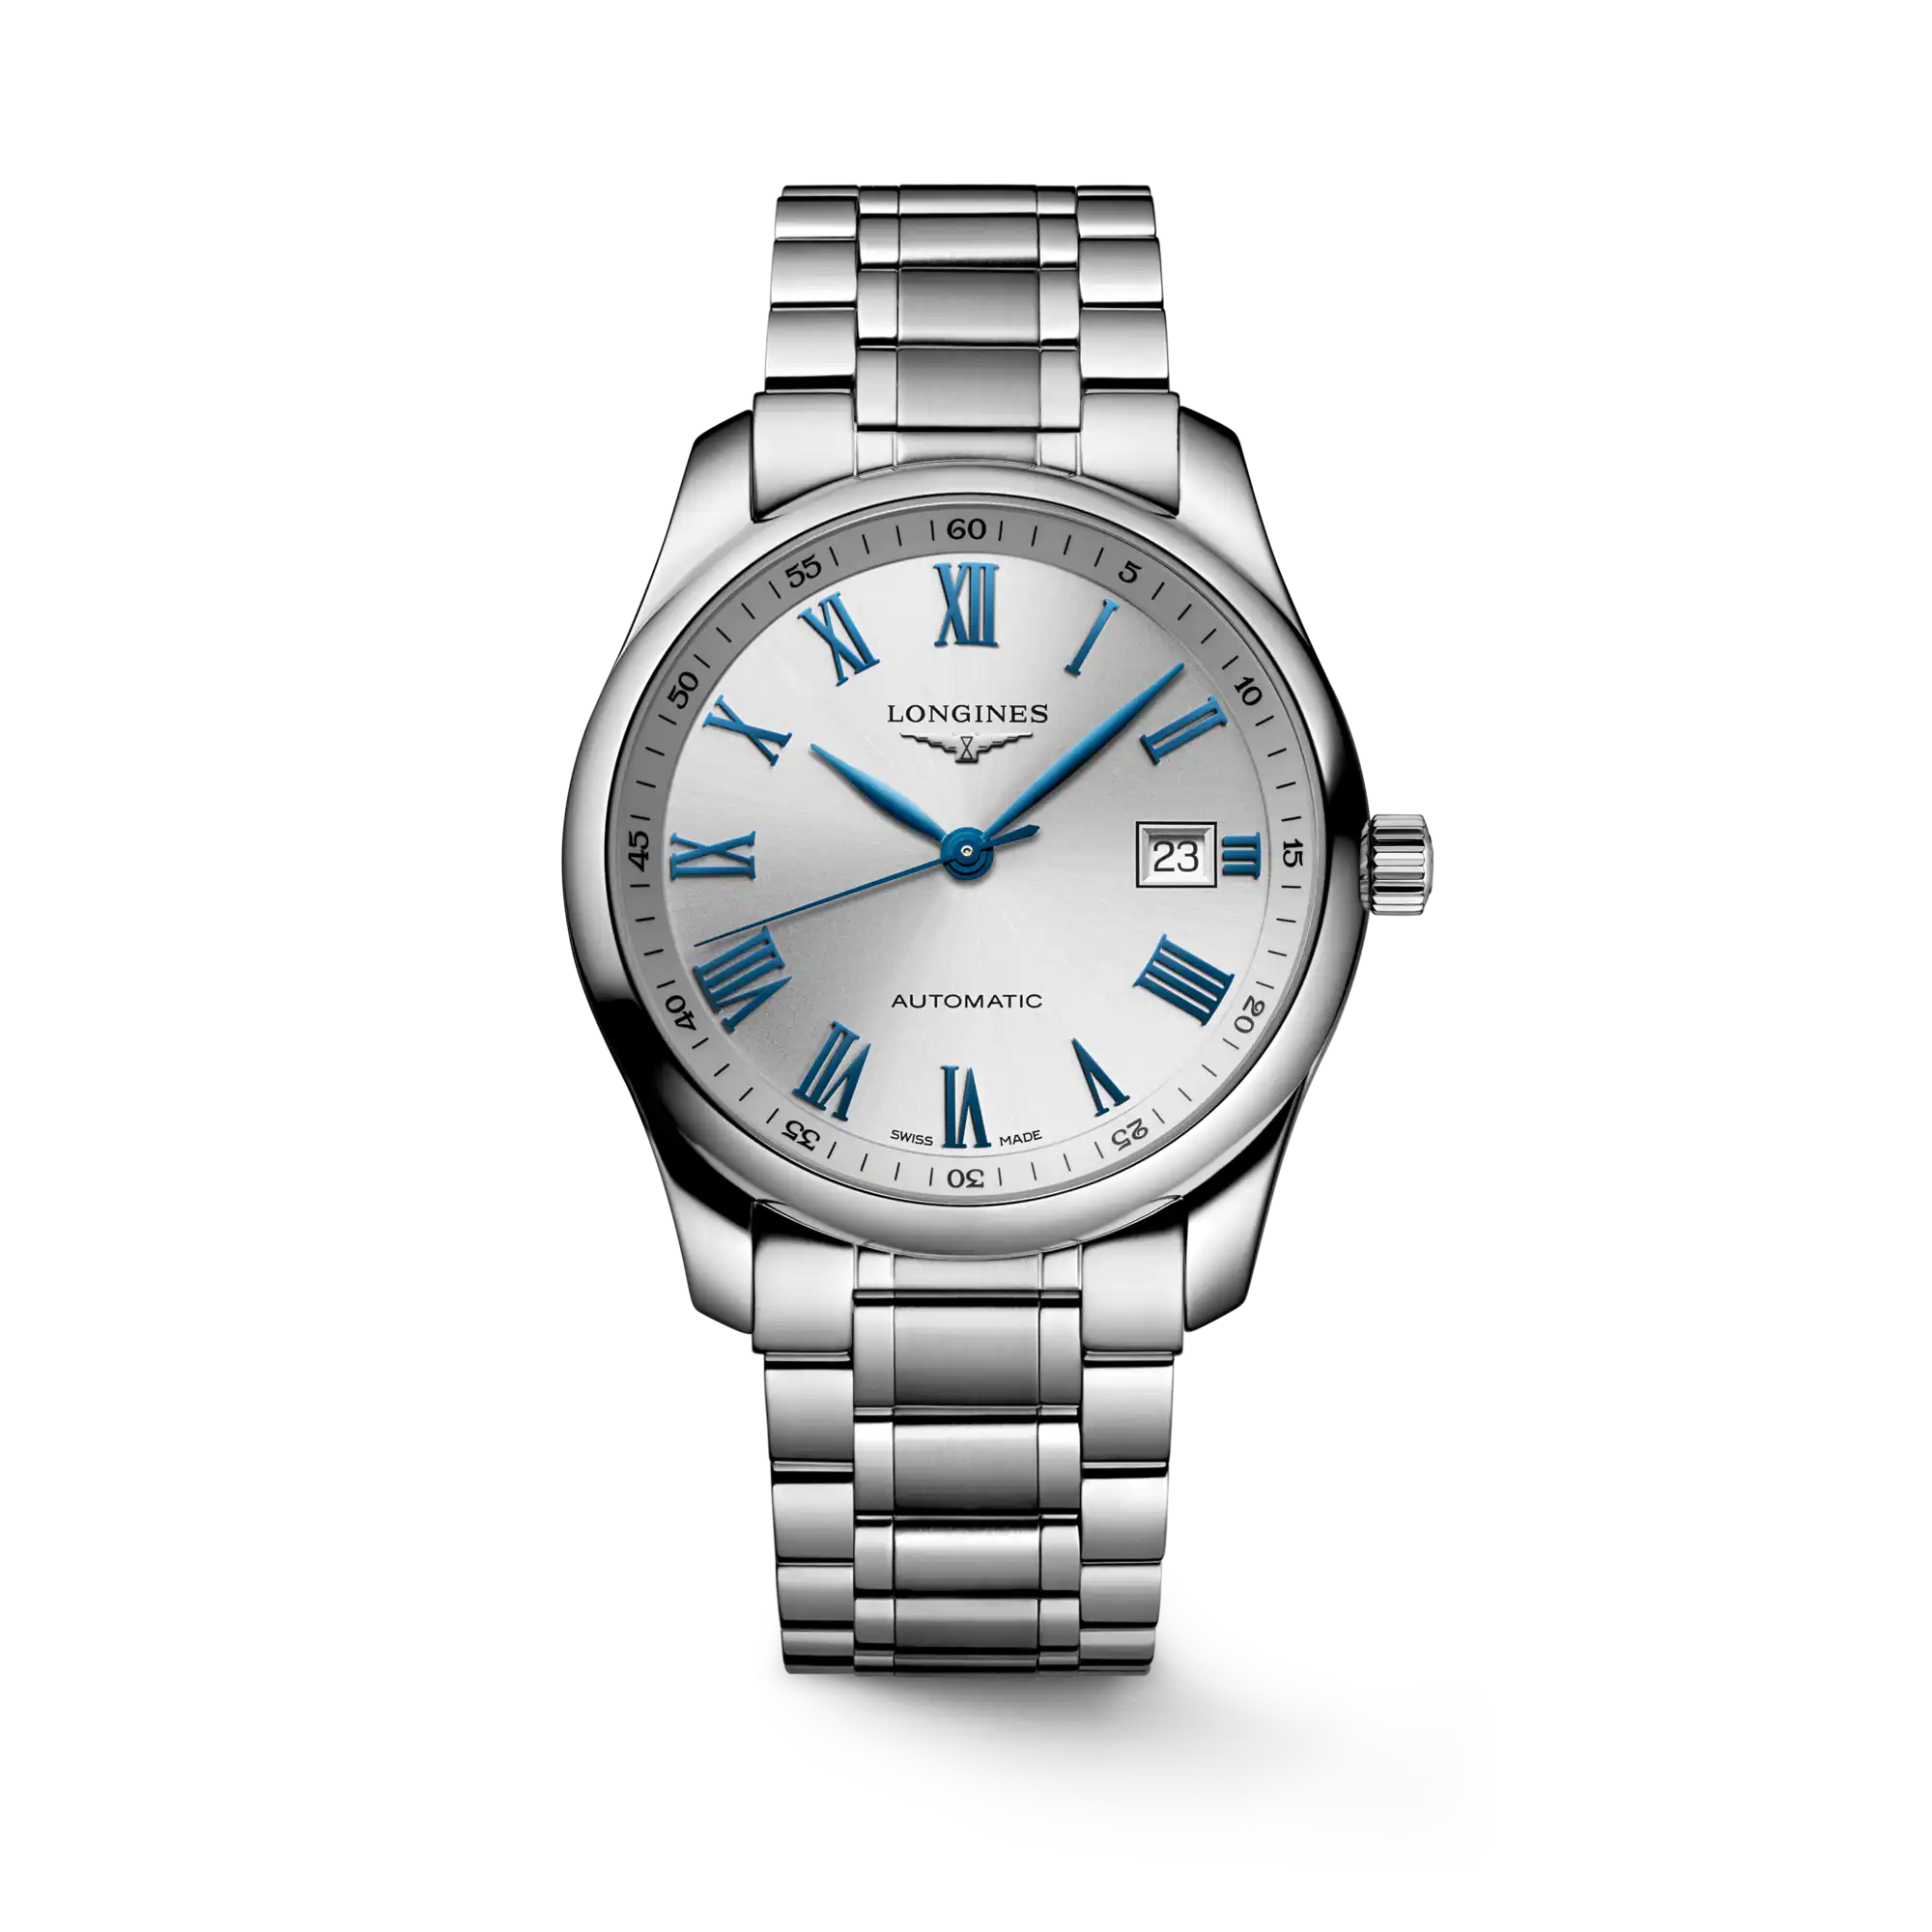 The Longines Master Collection Automatic Men's Watch L27934796